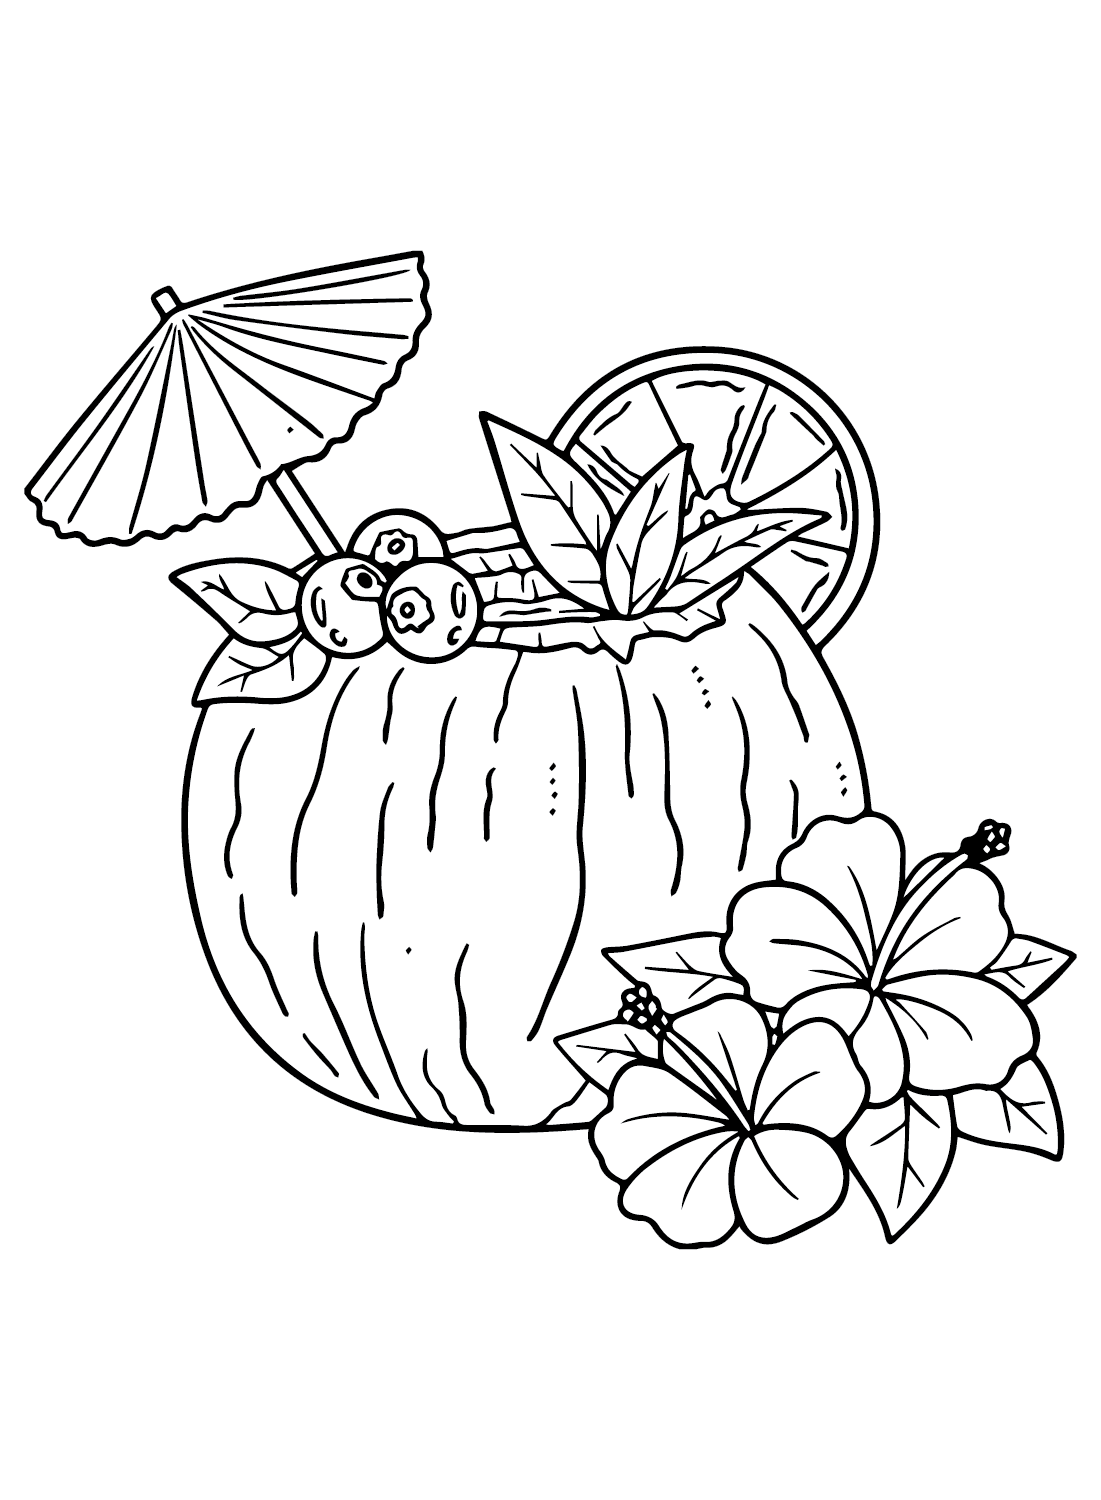 Coconut Free Coloring Page